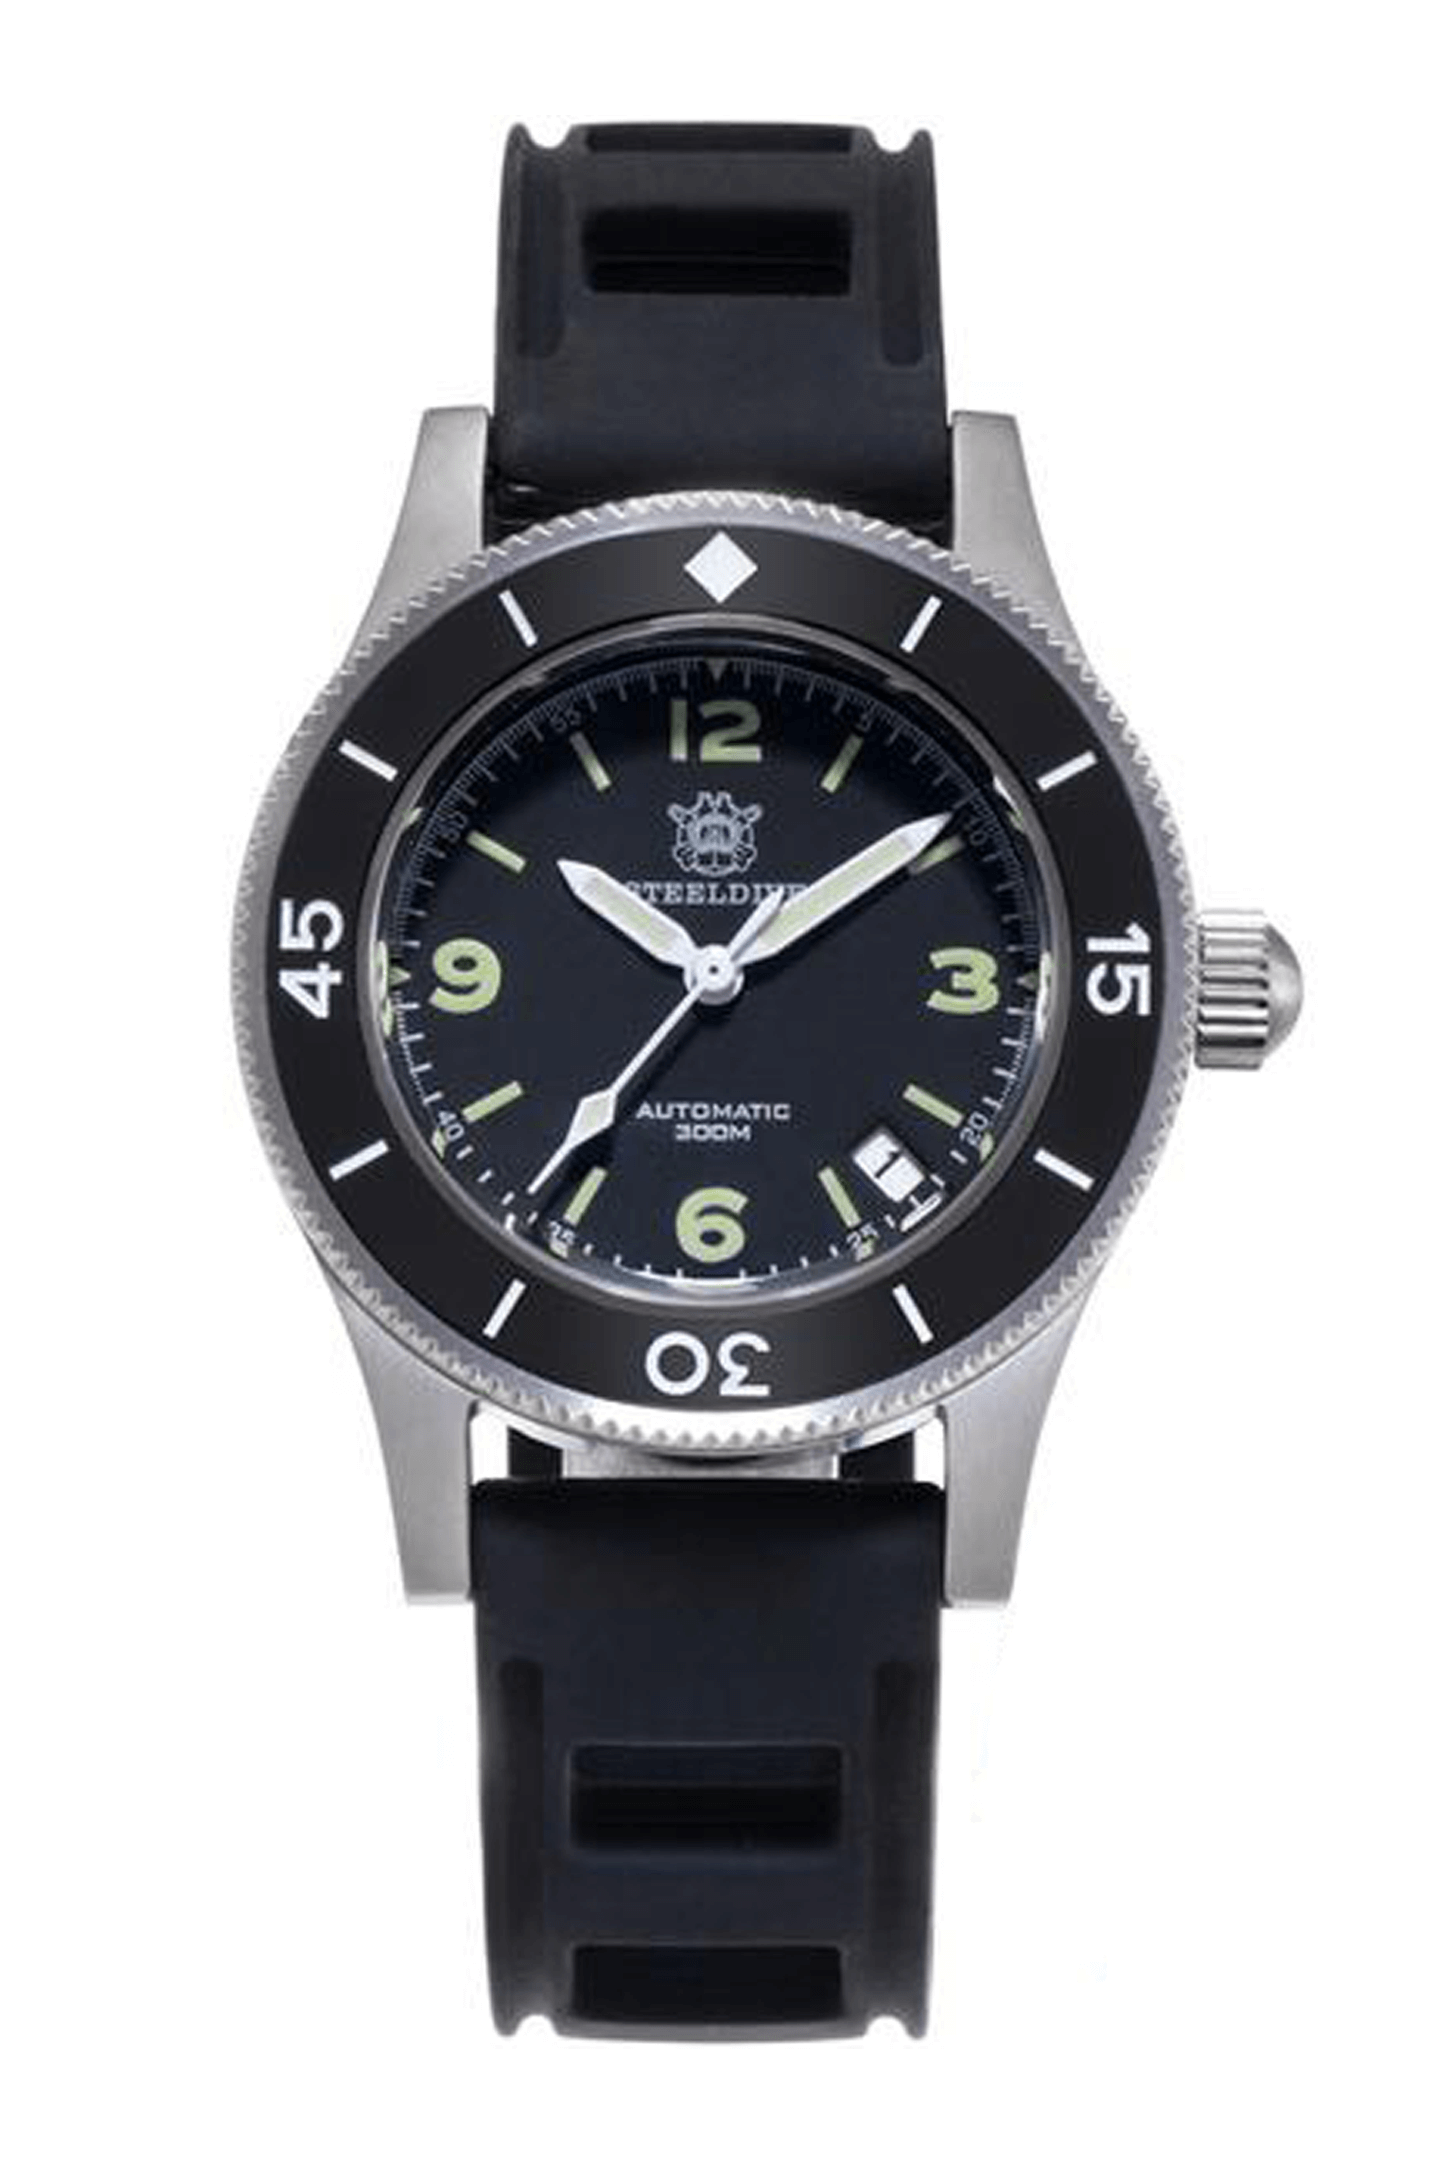 12 Blancpain Fifty Fathoms Homage Watches Worth Considering — Ben's Watch  Club